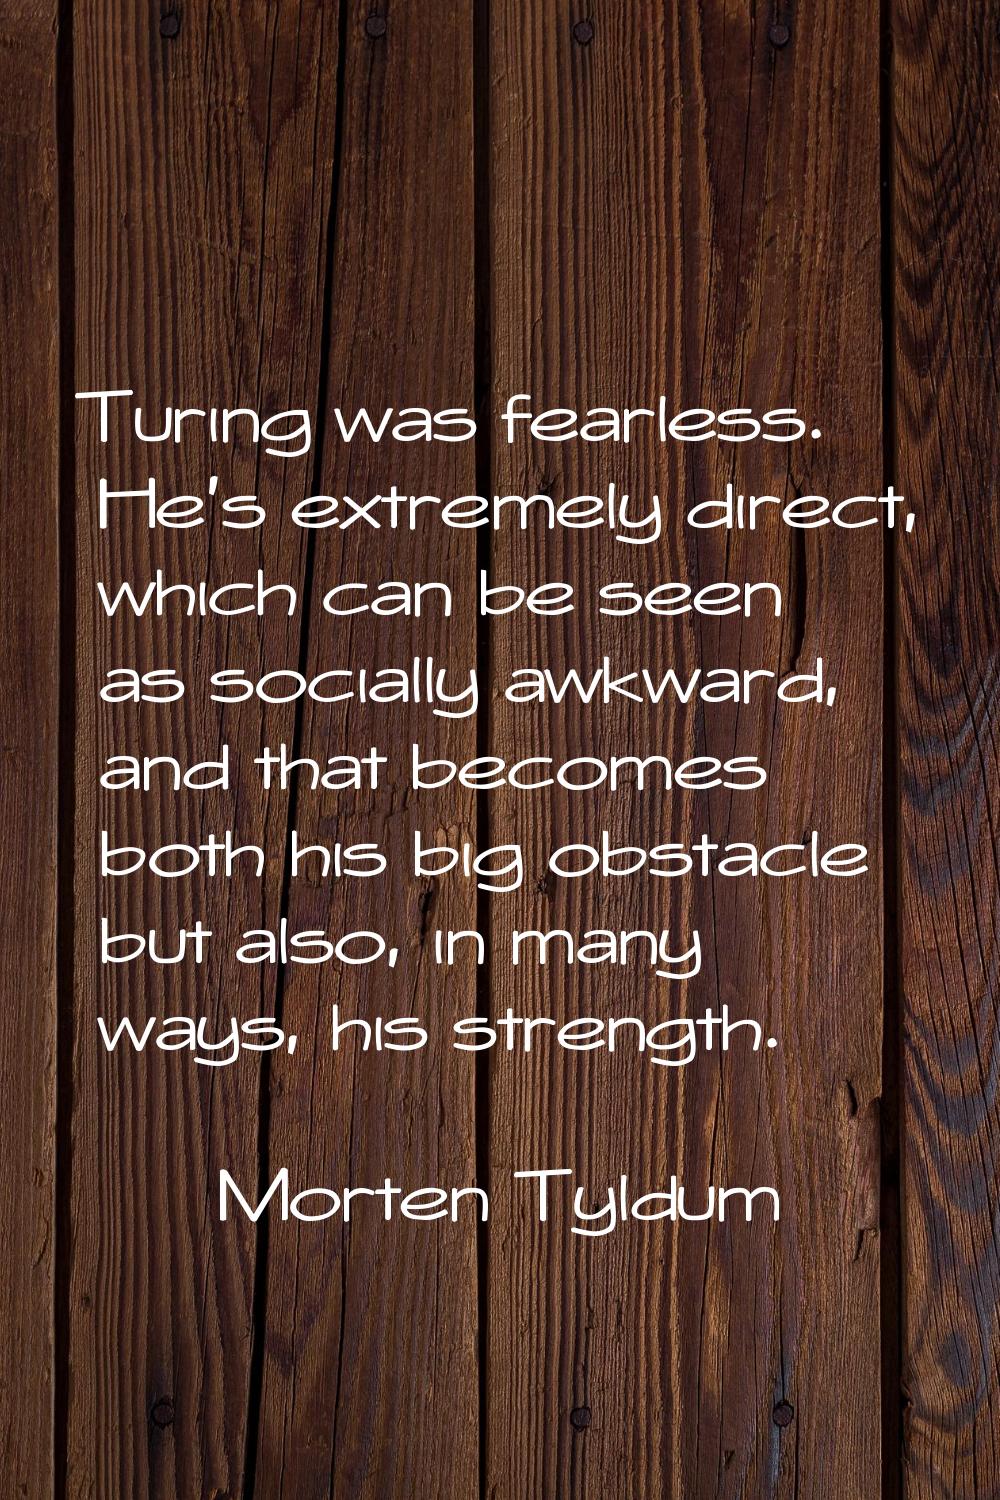 Turing was fearless. He's extremely direct, which can be seen as socially awkward, and that becomes